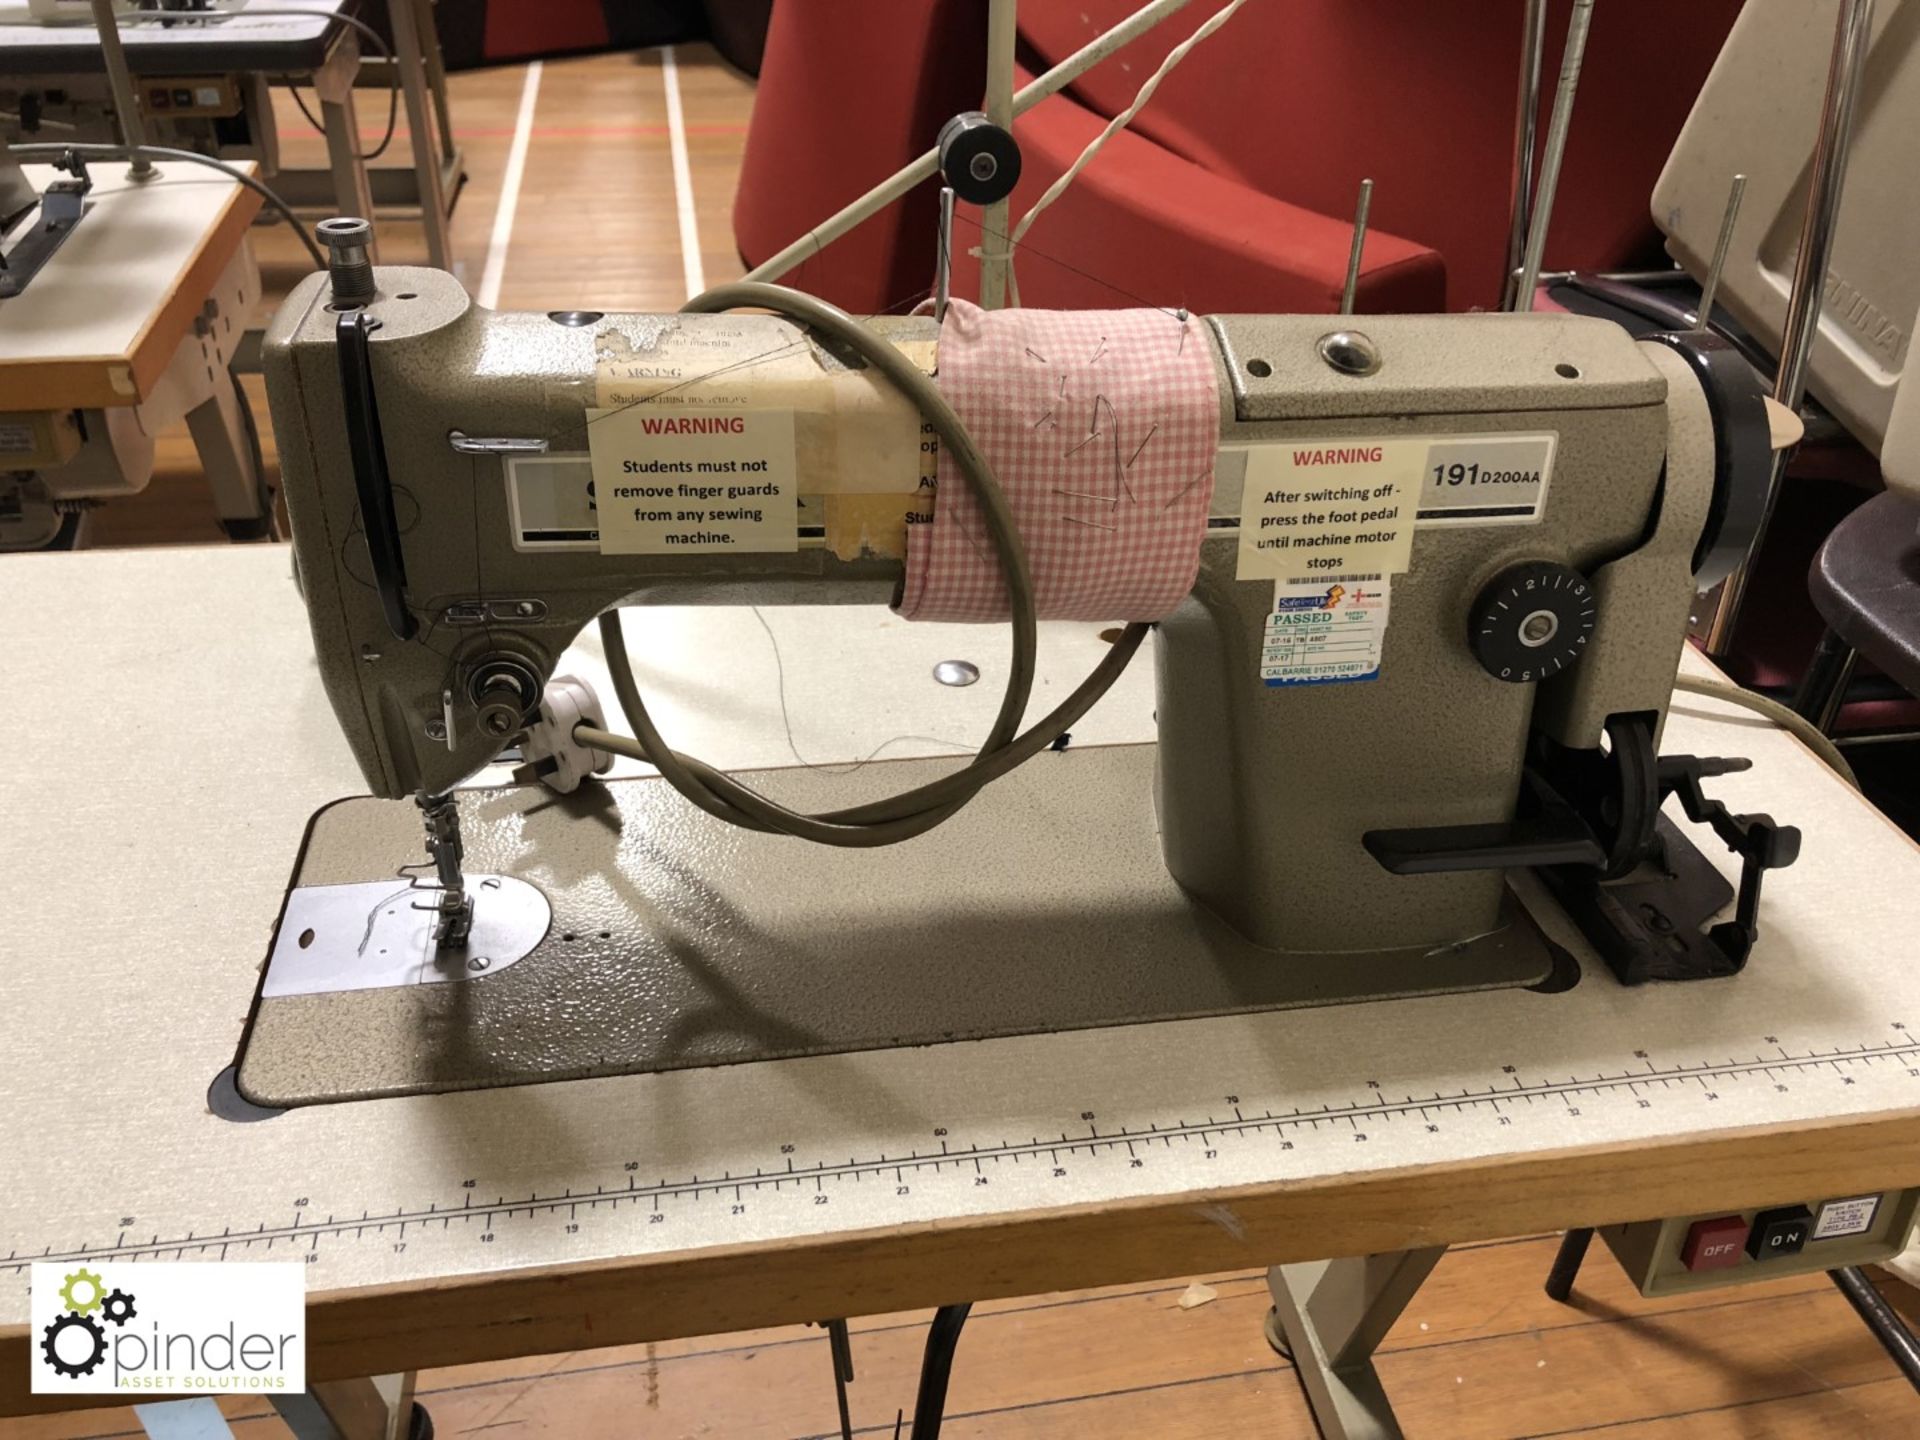 Singer 191 D200 AA Flatbed Sewing Machine, 240volts (located in Gymnasium, basement)